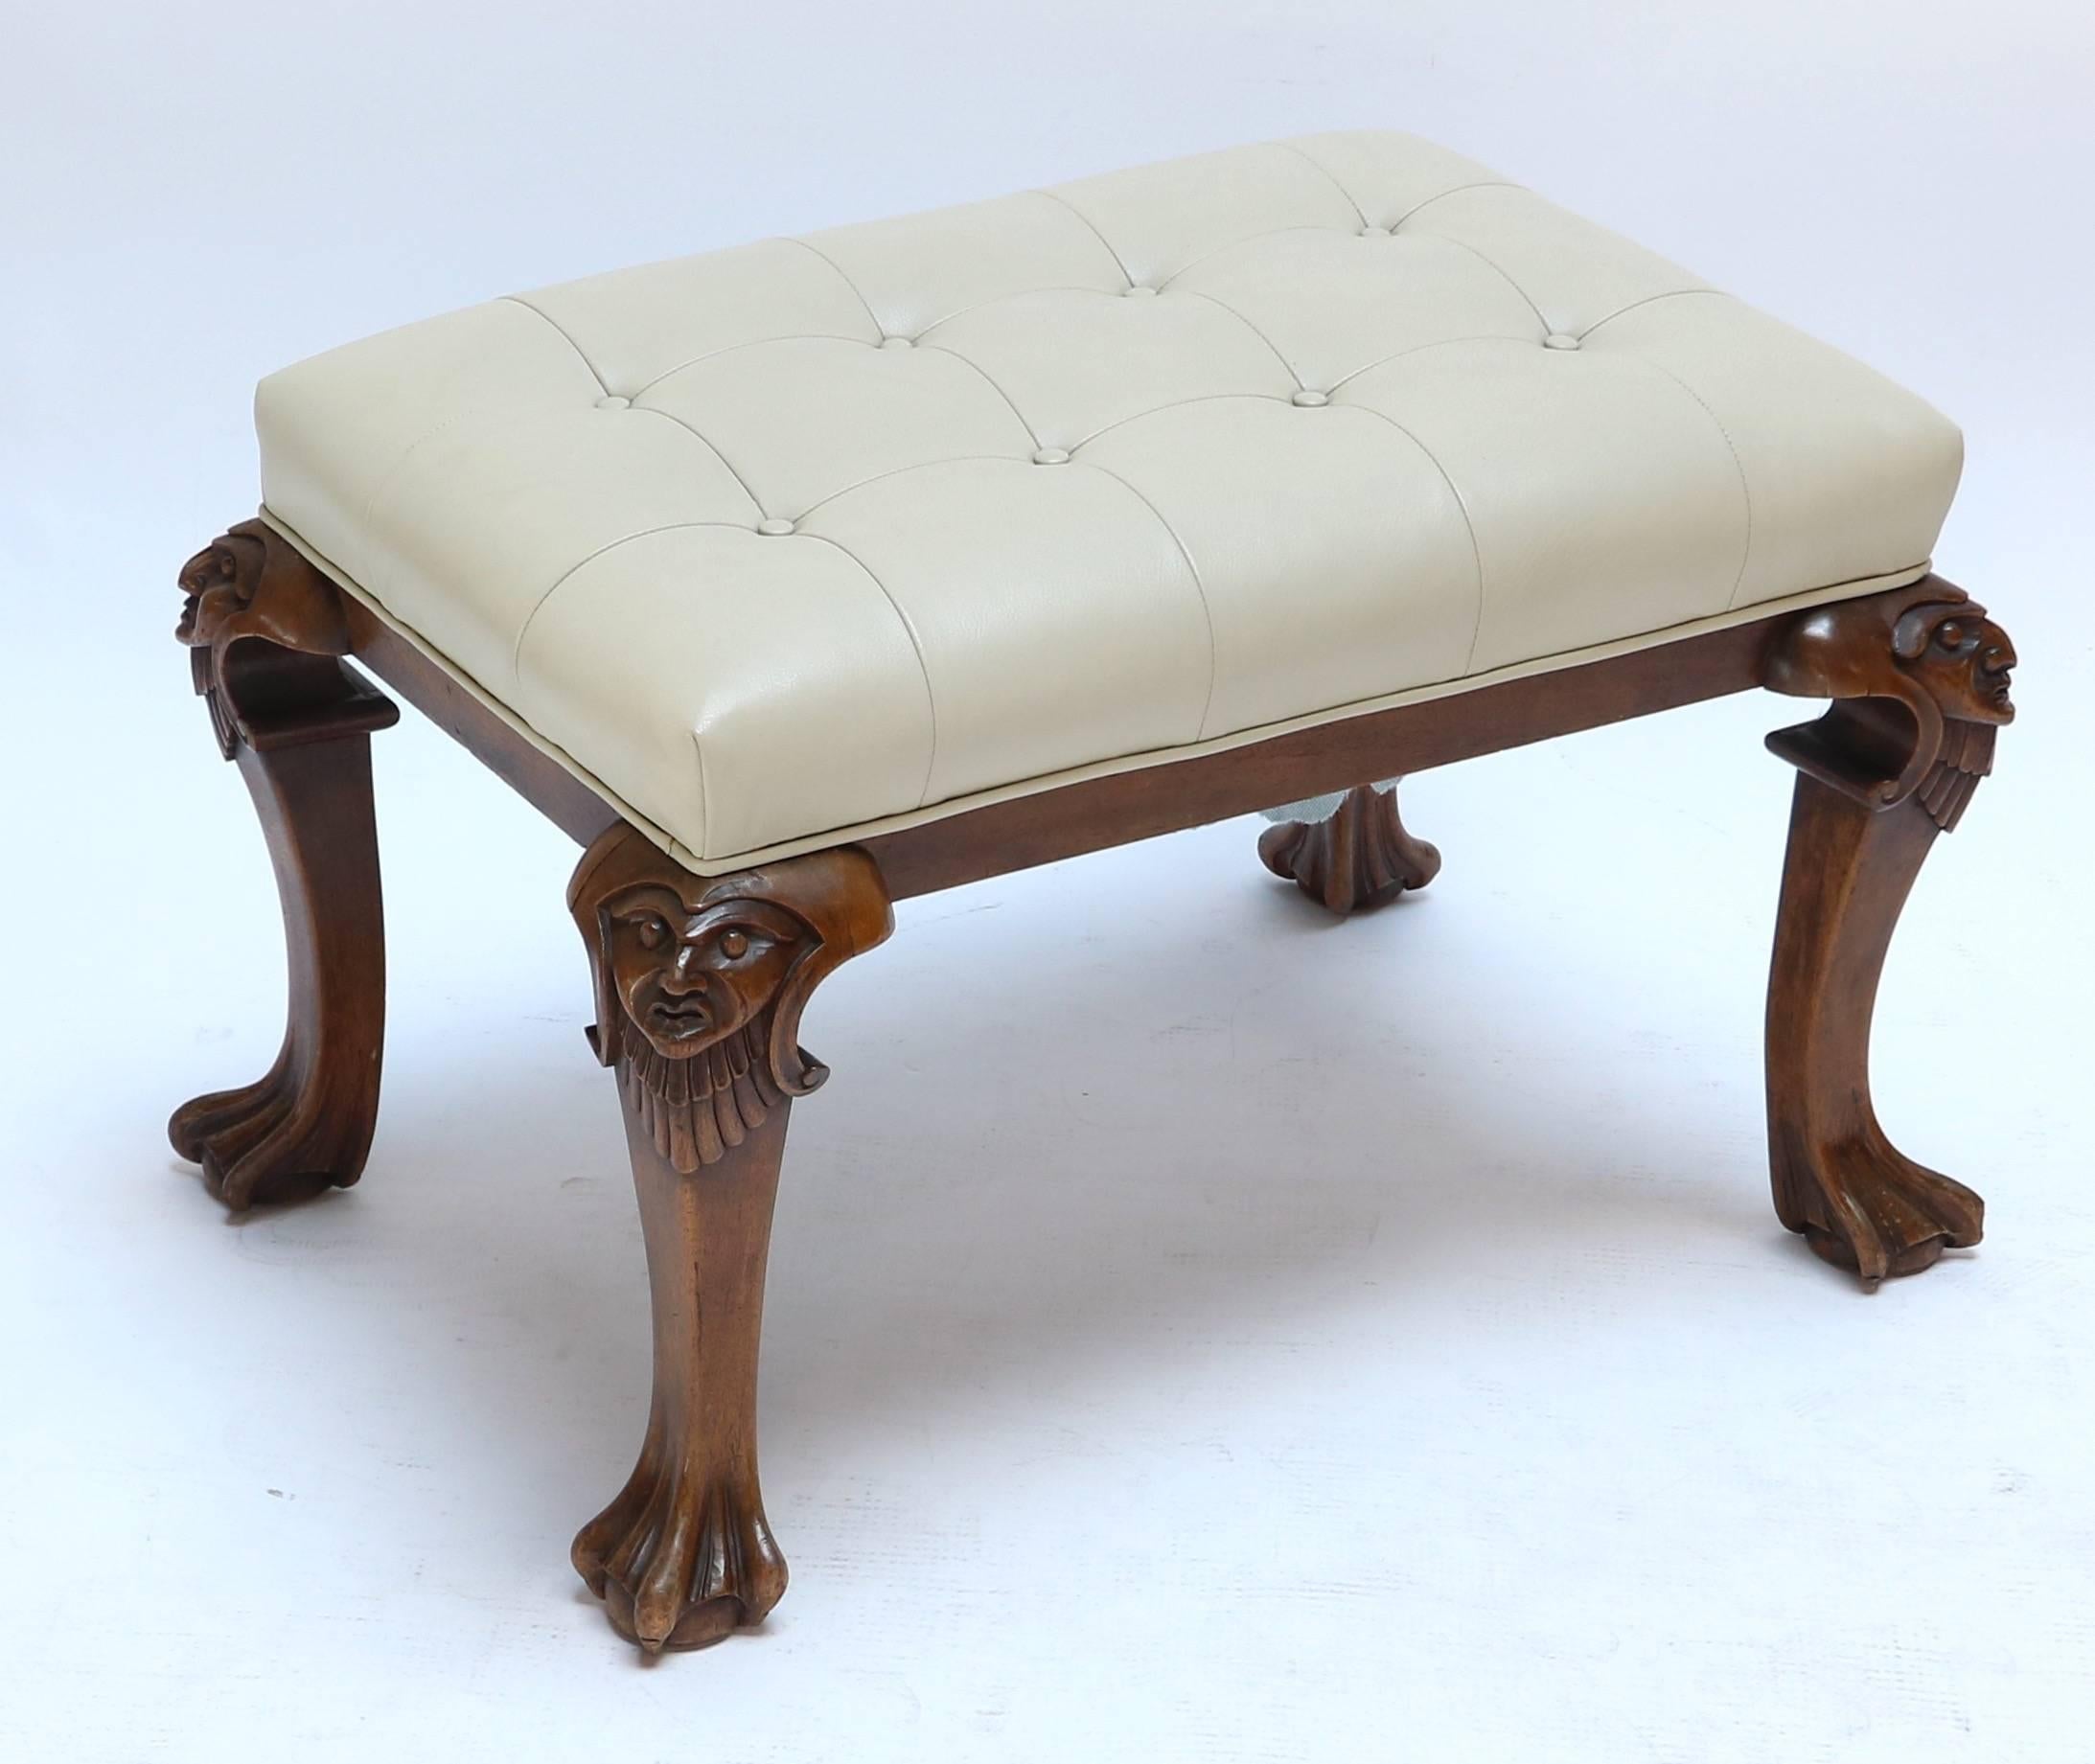 1960s Italian carved wood tufted bench upholstered in tan or beige leather.